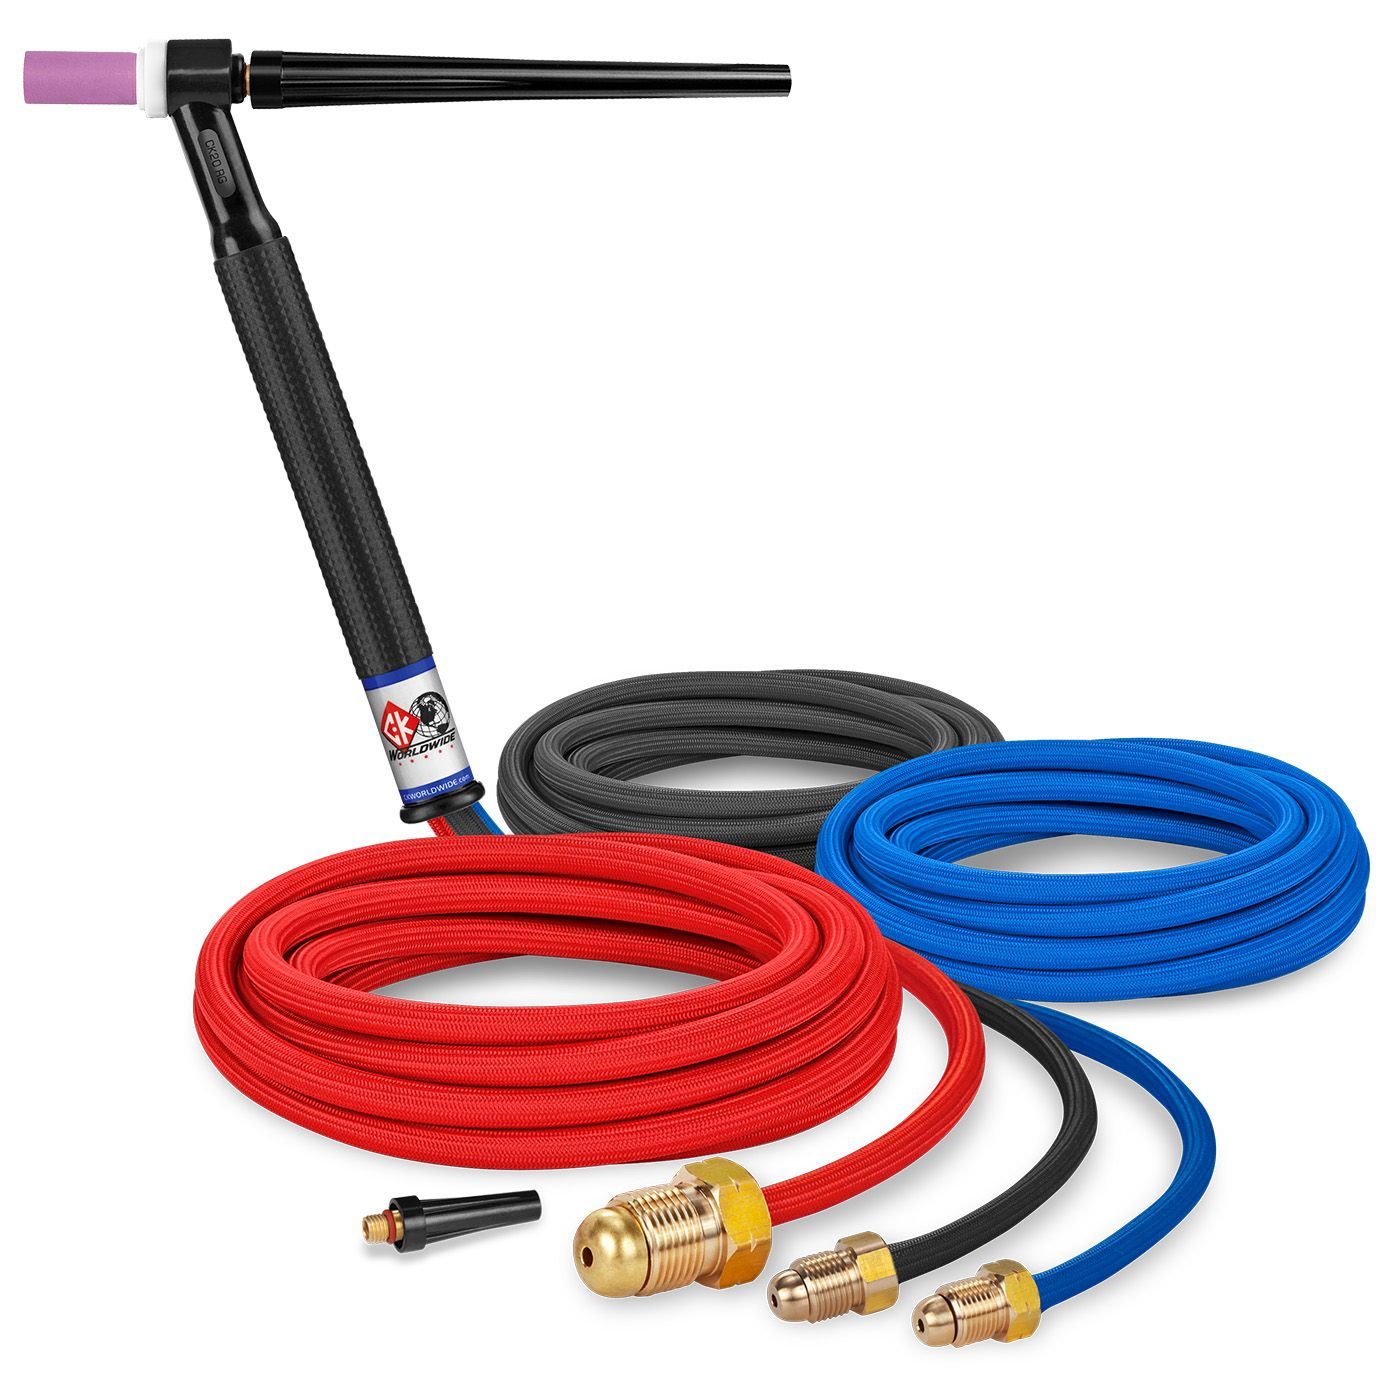 * CK Worldwide | TIG Torch #20 - 2 Series (Water Cooled) (CK20-12SF FX) W/ 12.5ft. Super Flex Cable